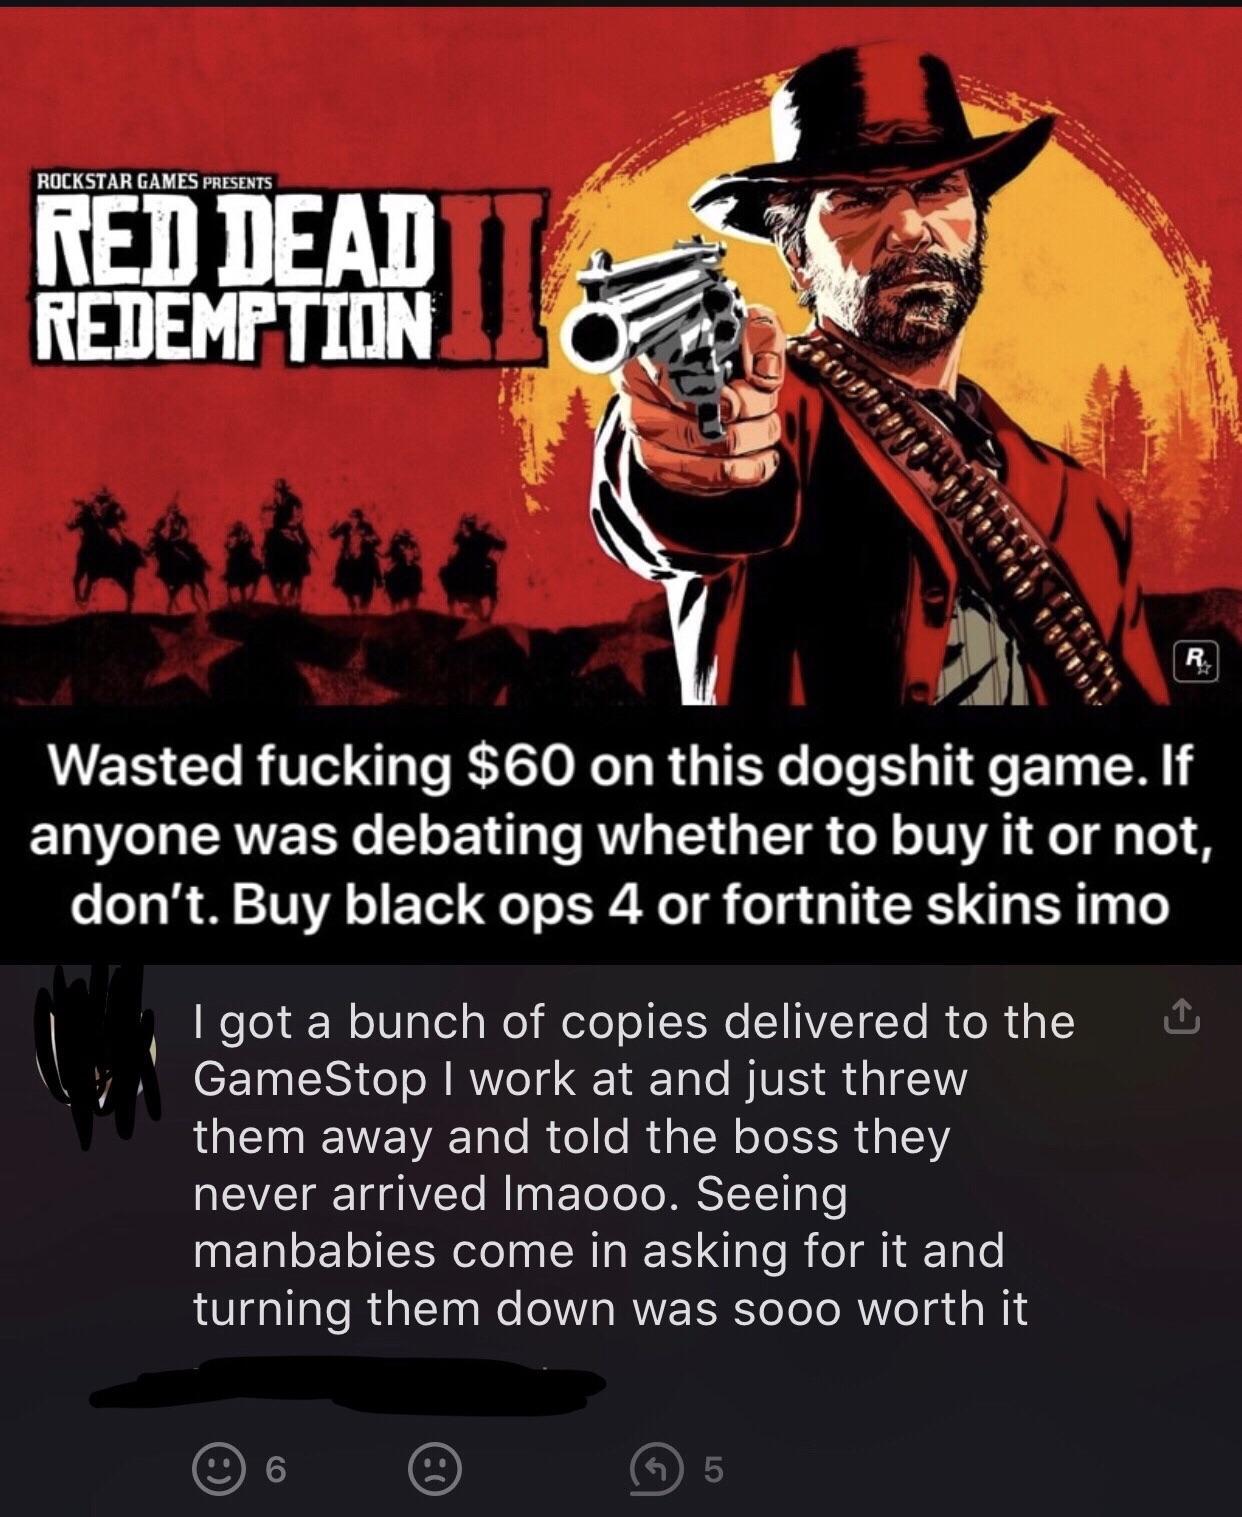 Rockstar Games Presents Red Dead Redemption R Wasted fucking $60 on this dogshit game. If anyone was debating whether to buy it or not, don't. Buy black ops 4 or fortnite skins imo I got a bunch of copies delivered to the GameStop I work at and just threw